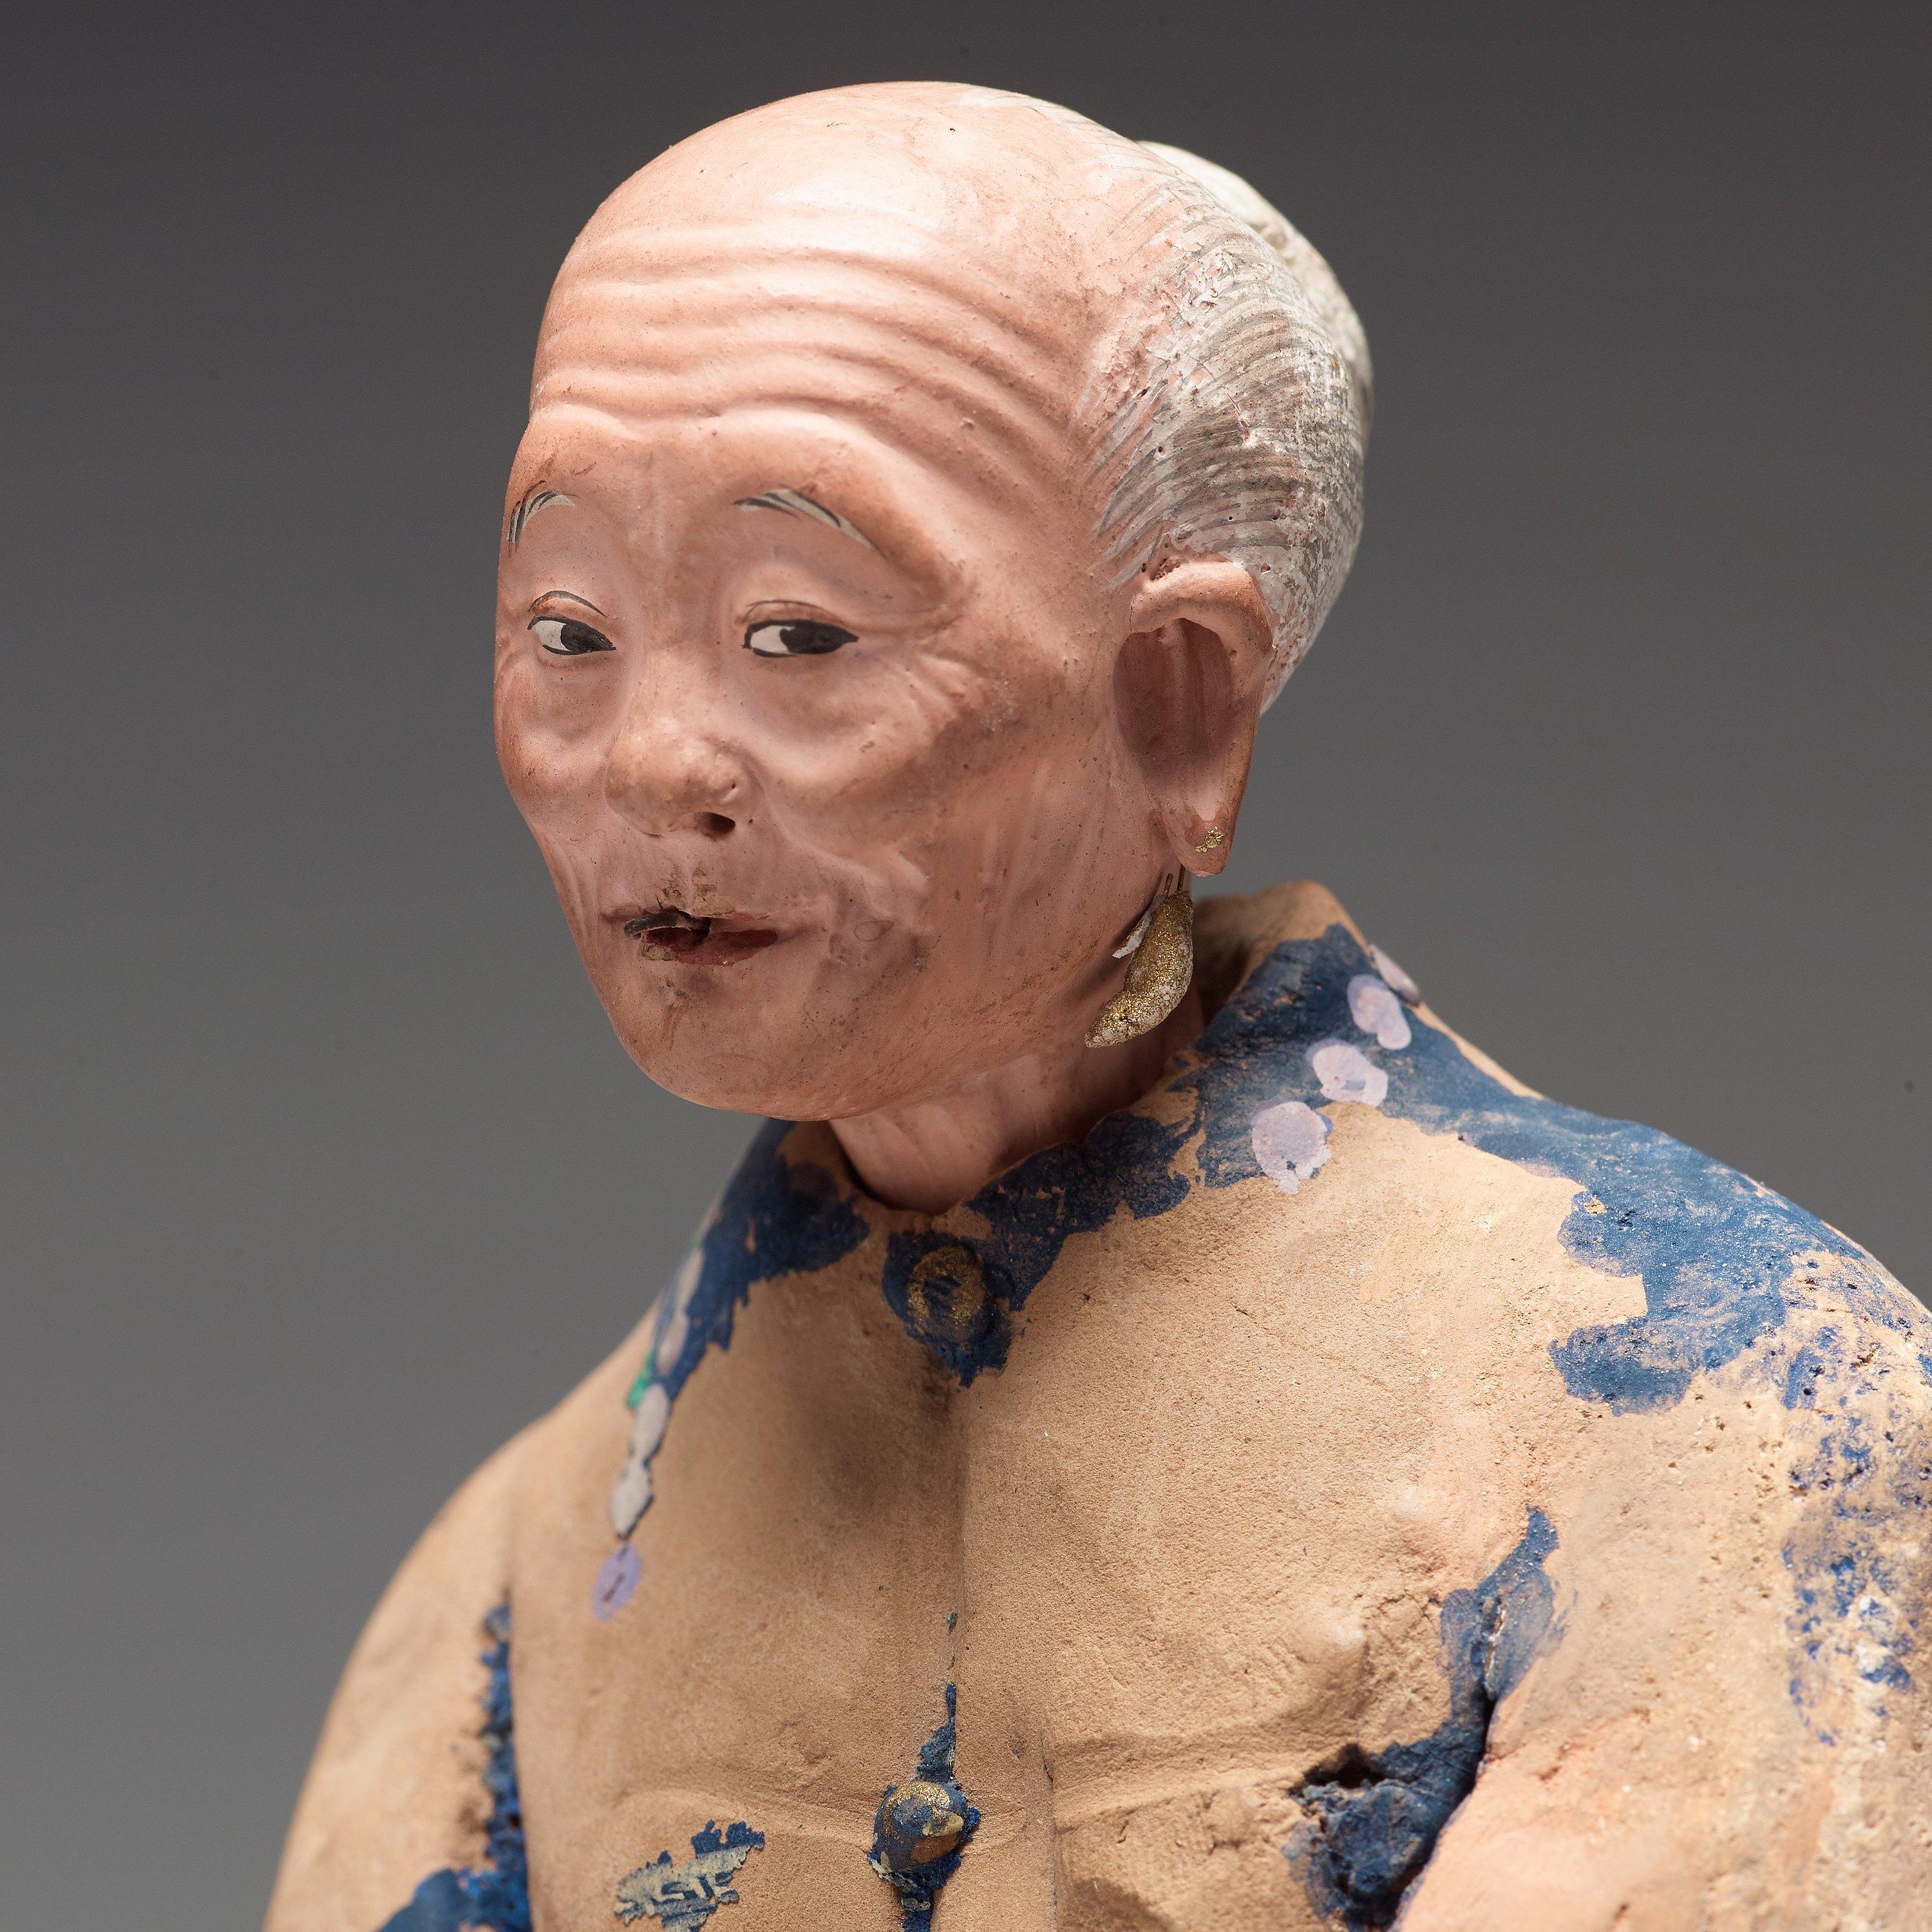 A Chinese sculptured and painted clay figure of an elderly man, 19th century. Partly worn off paint and probably missing a pair of feet.